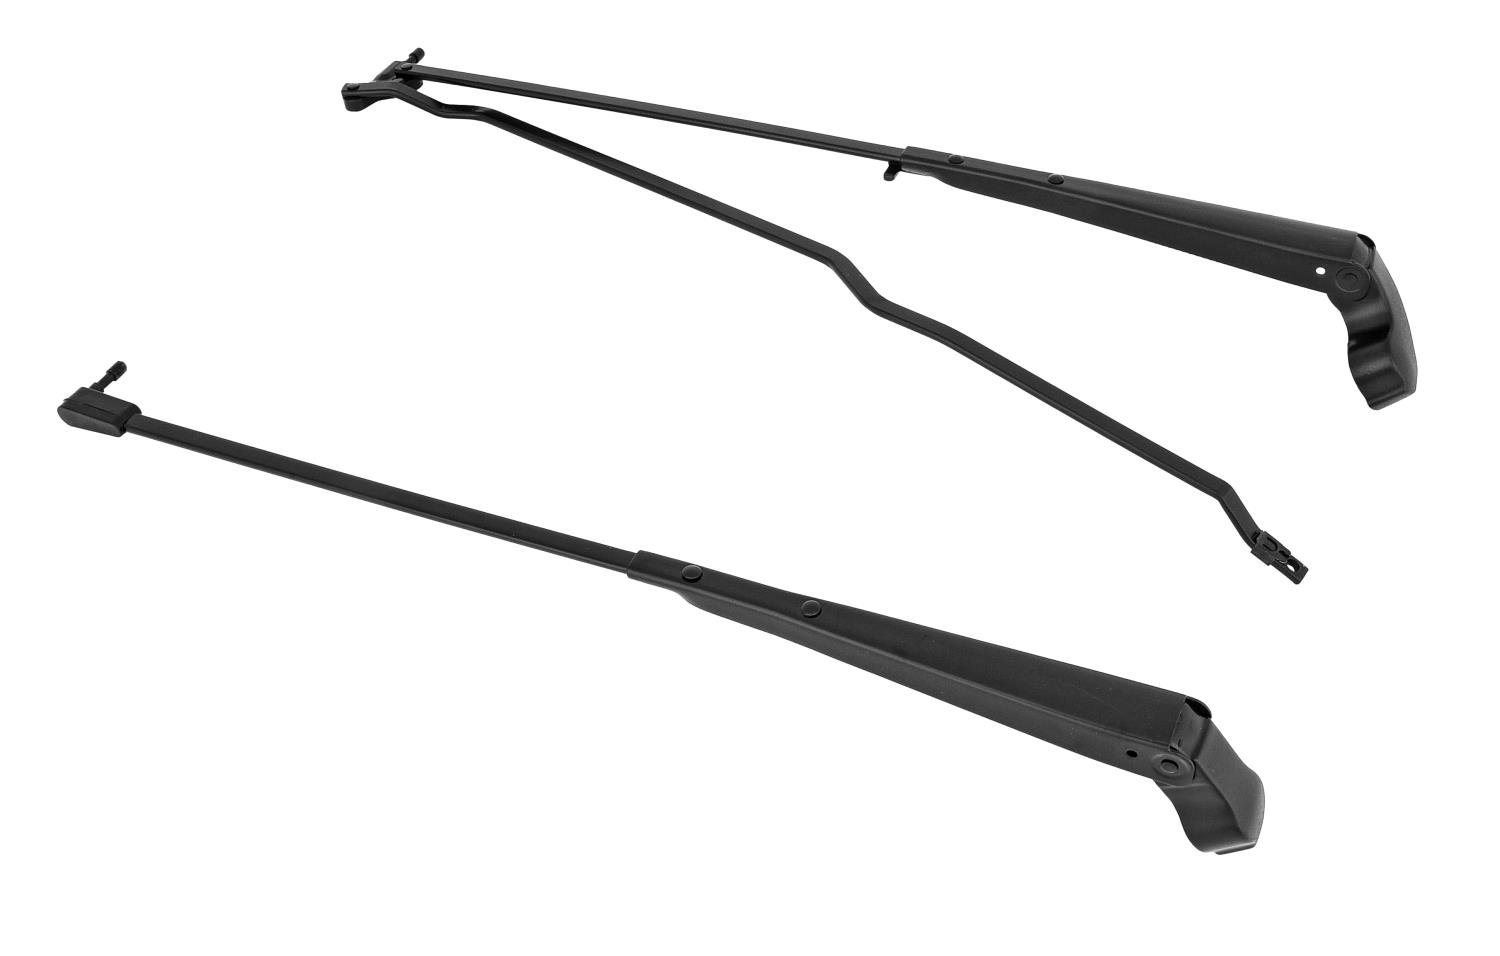 Windshield Wiper Arms for 1970-1981 Chevy Camaro, Pontiac Firebird; 1981-1987 Buick Regal [Recessed/Concealed]